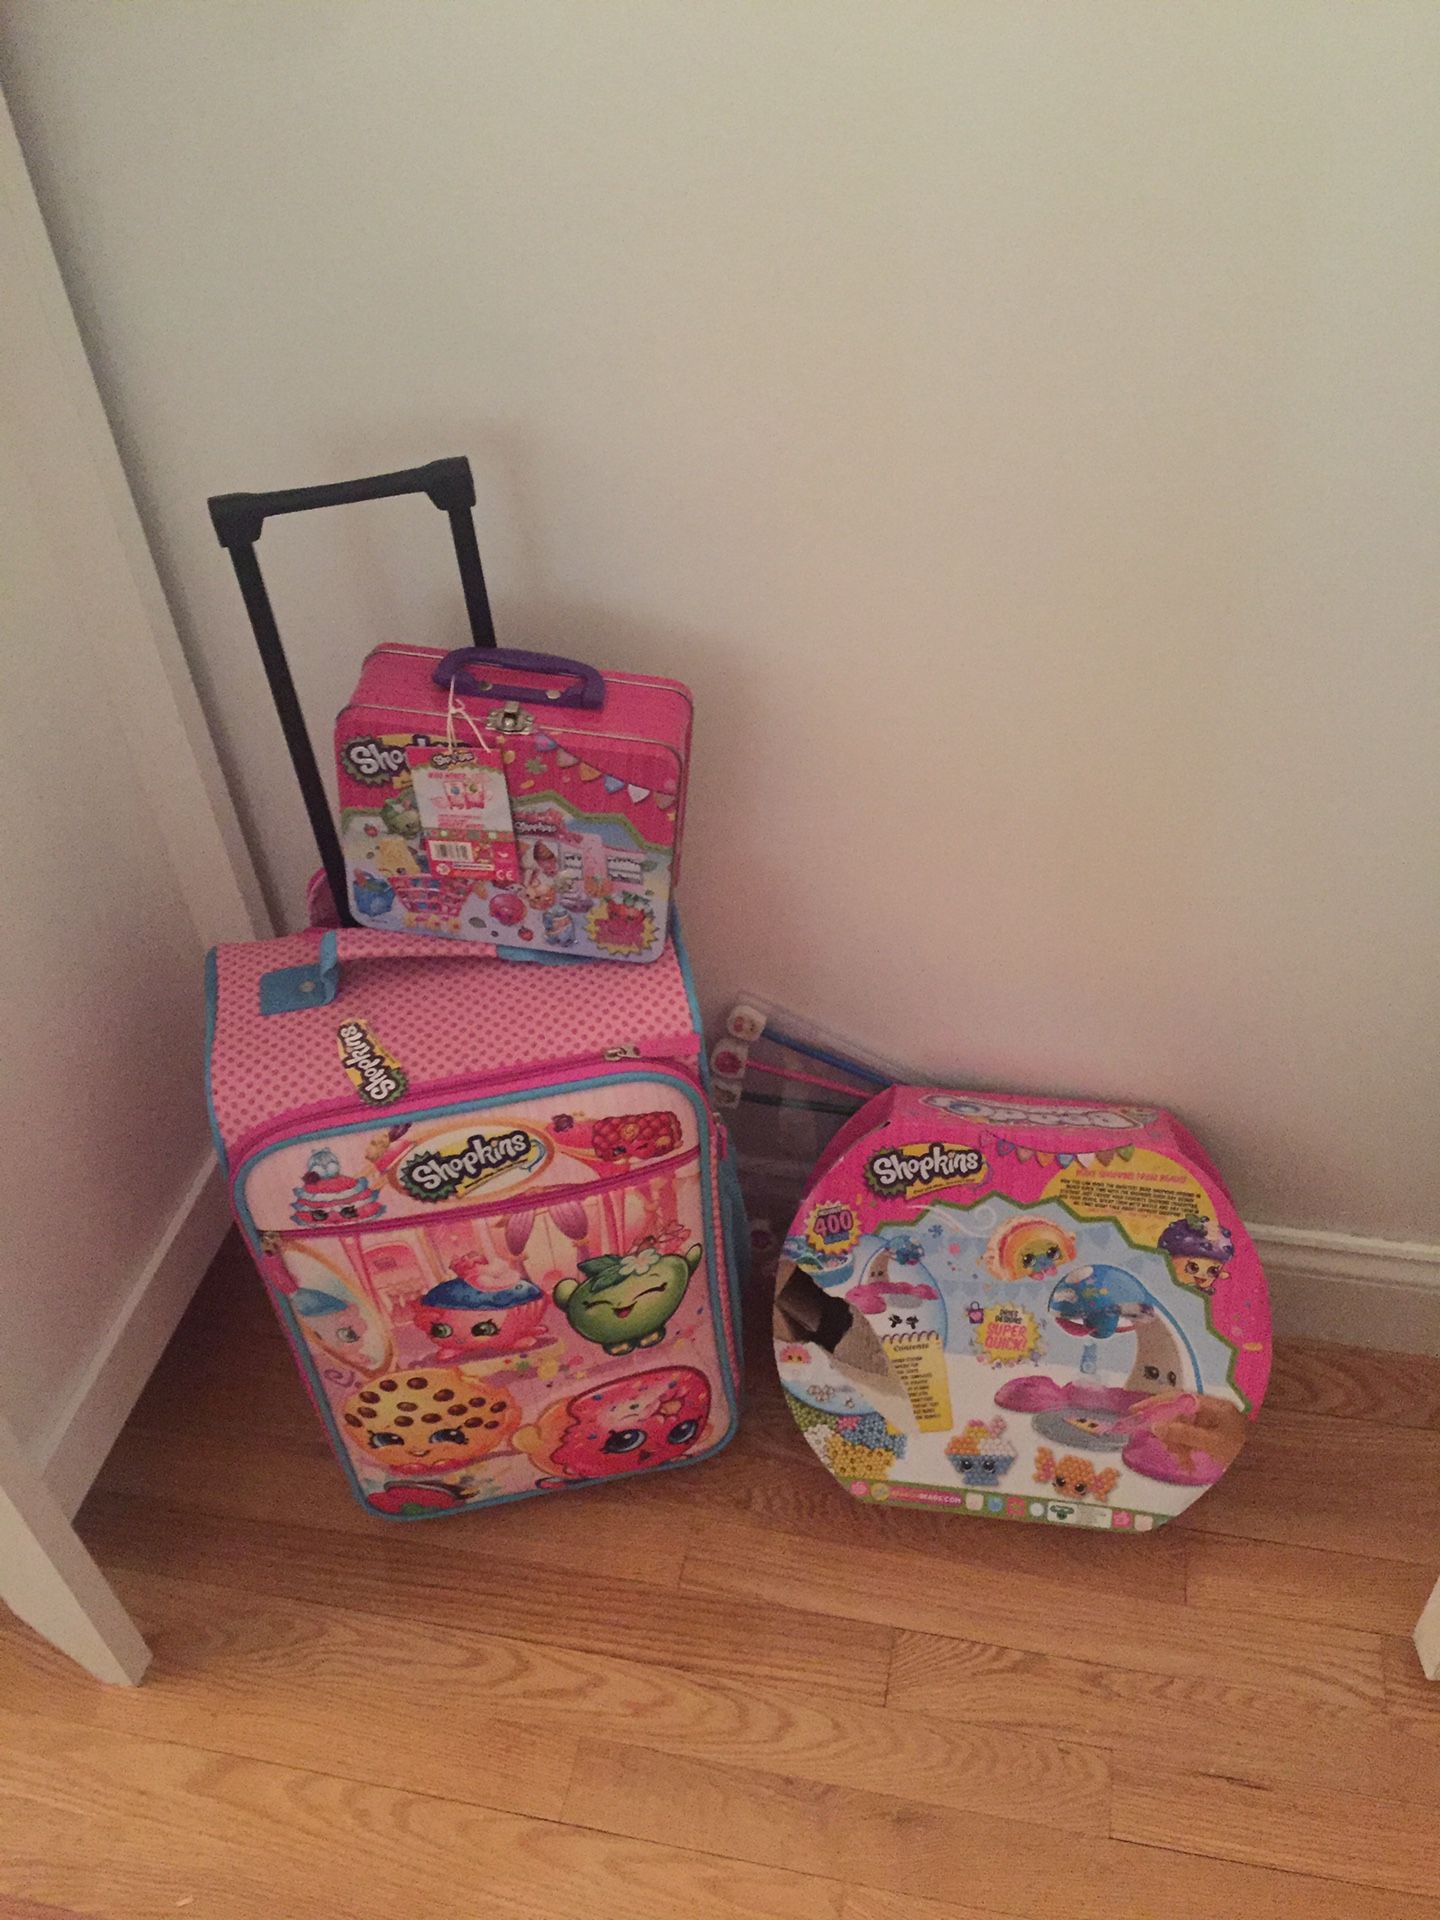 Shopkins suitcase. Lunchbox and kit